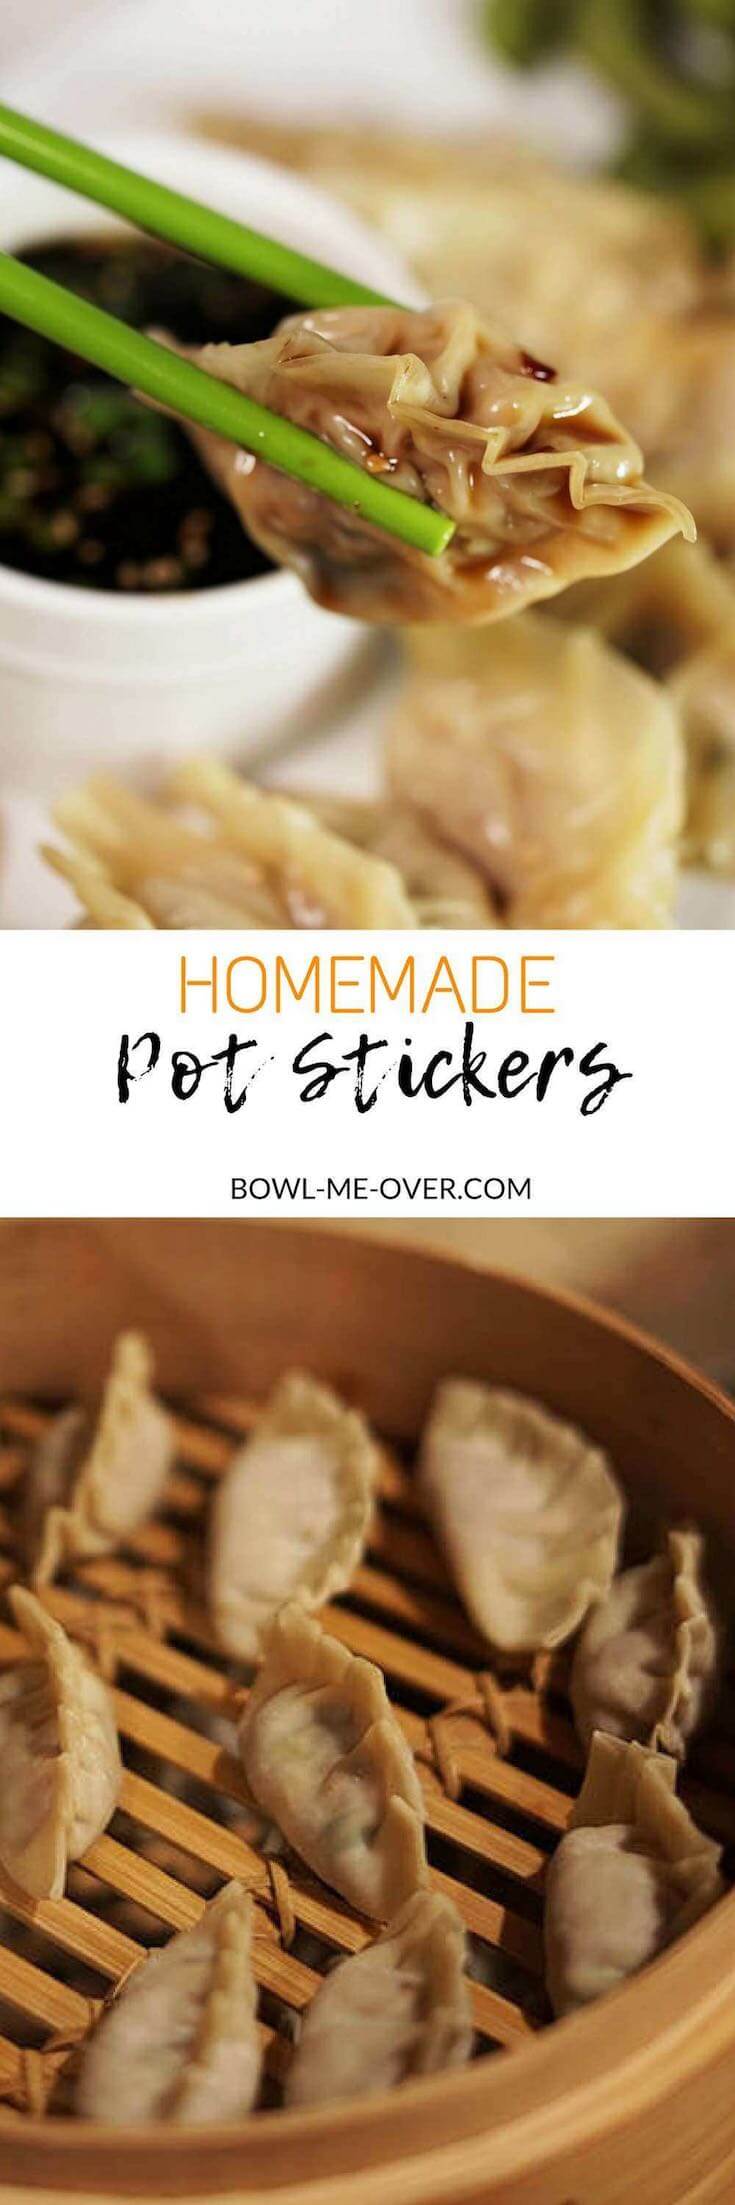 How to make Pot Stickers - Bowl Me Over